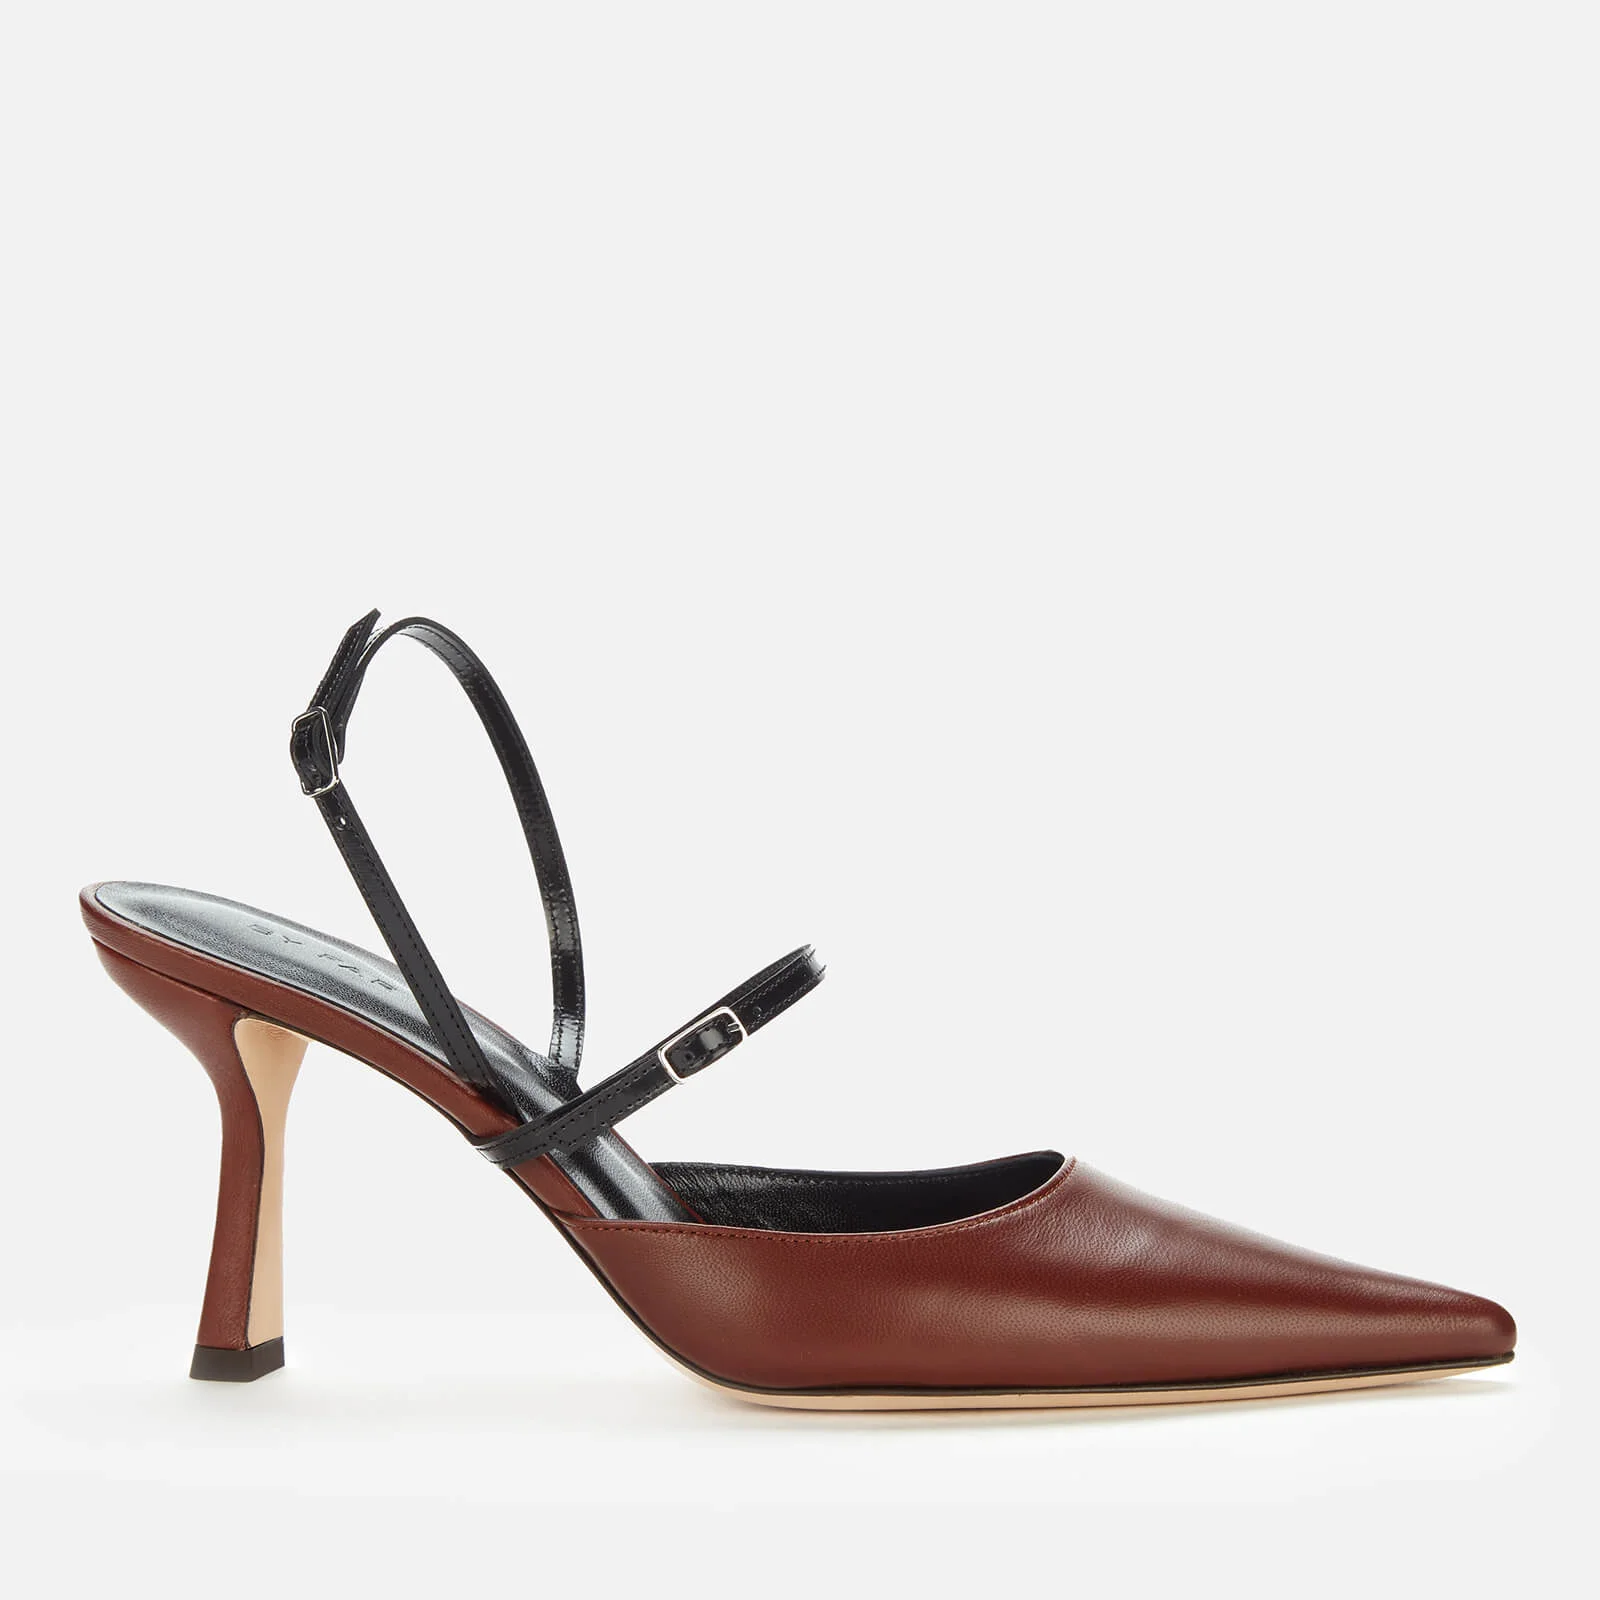 BY FAR Women's Tiffany Leather Court Shoes - Dark Brown Image 1